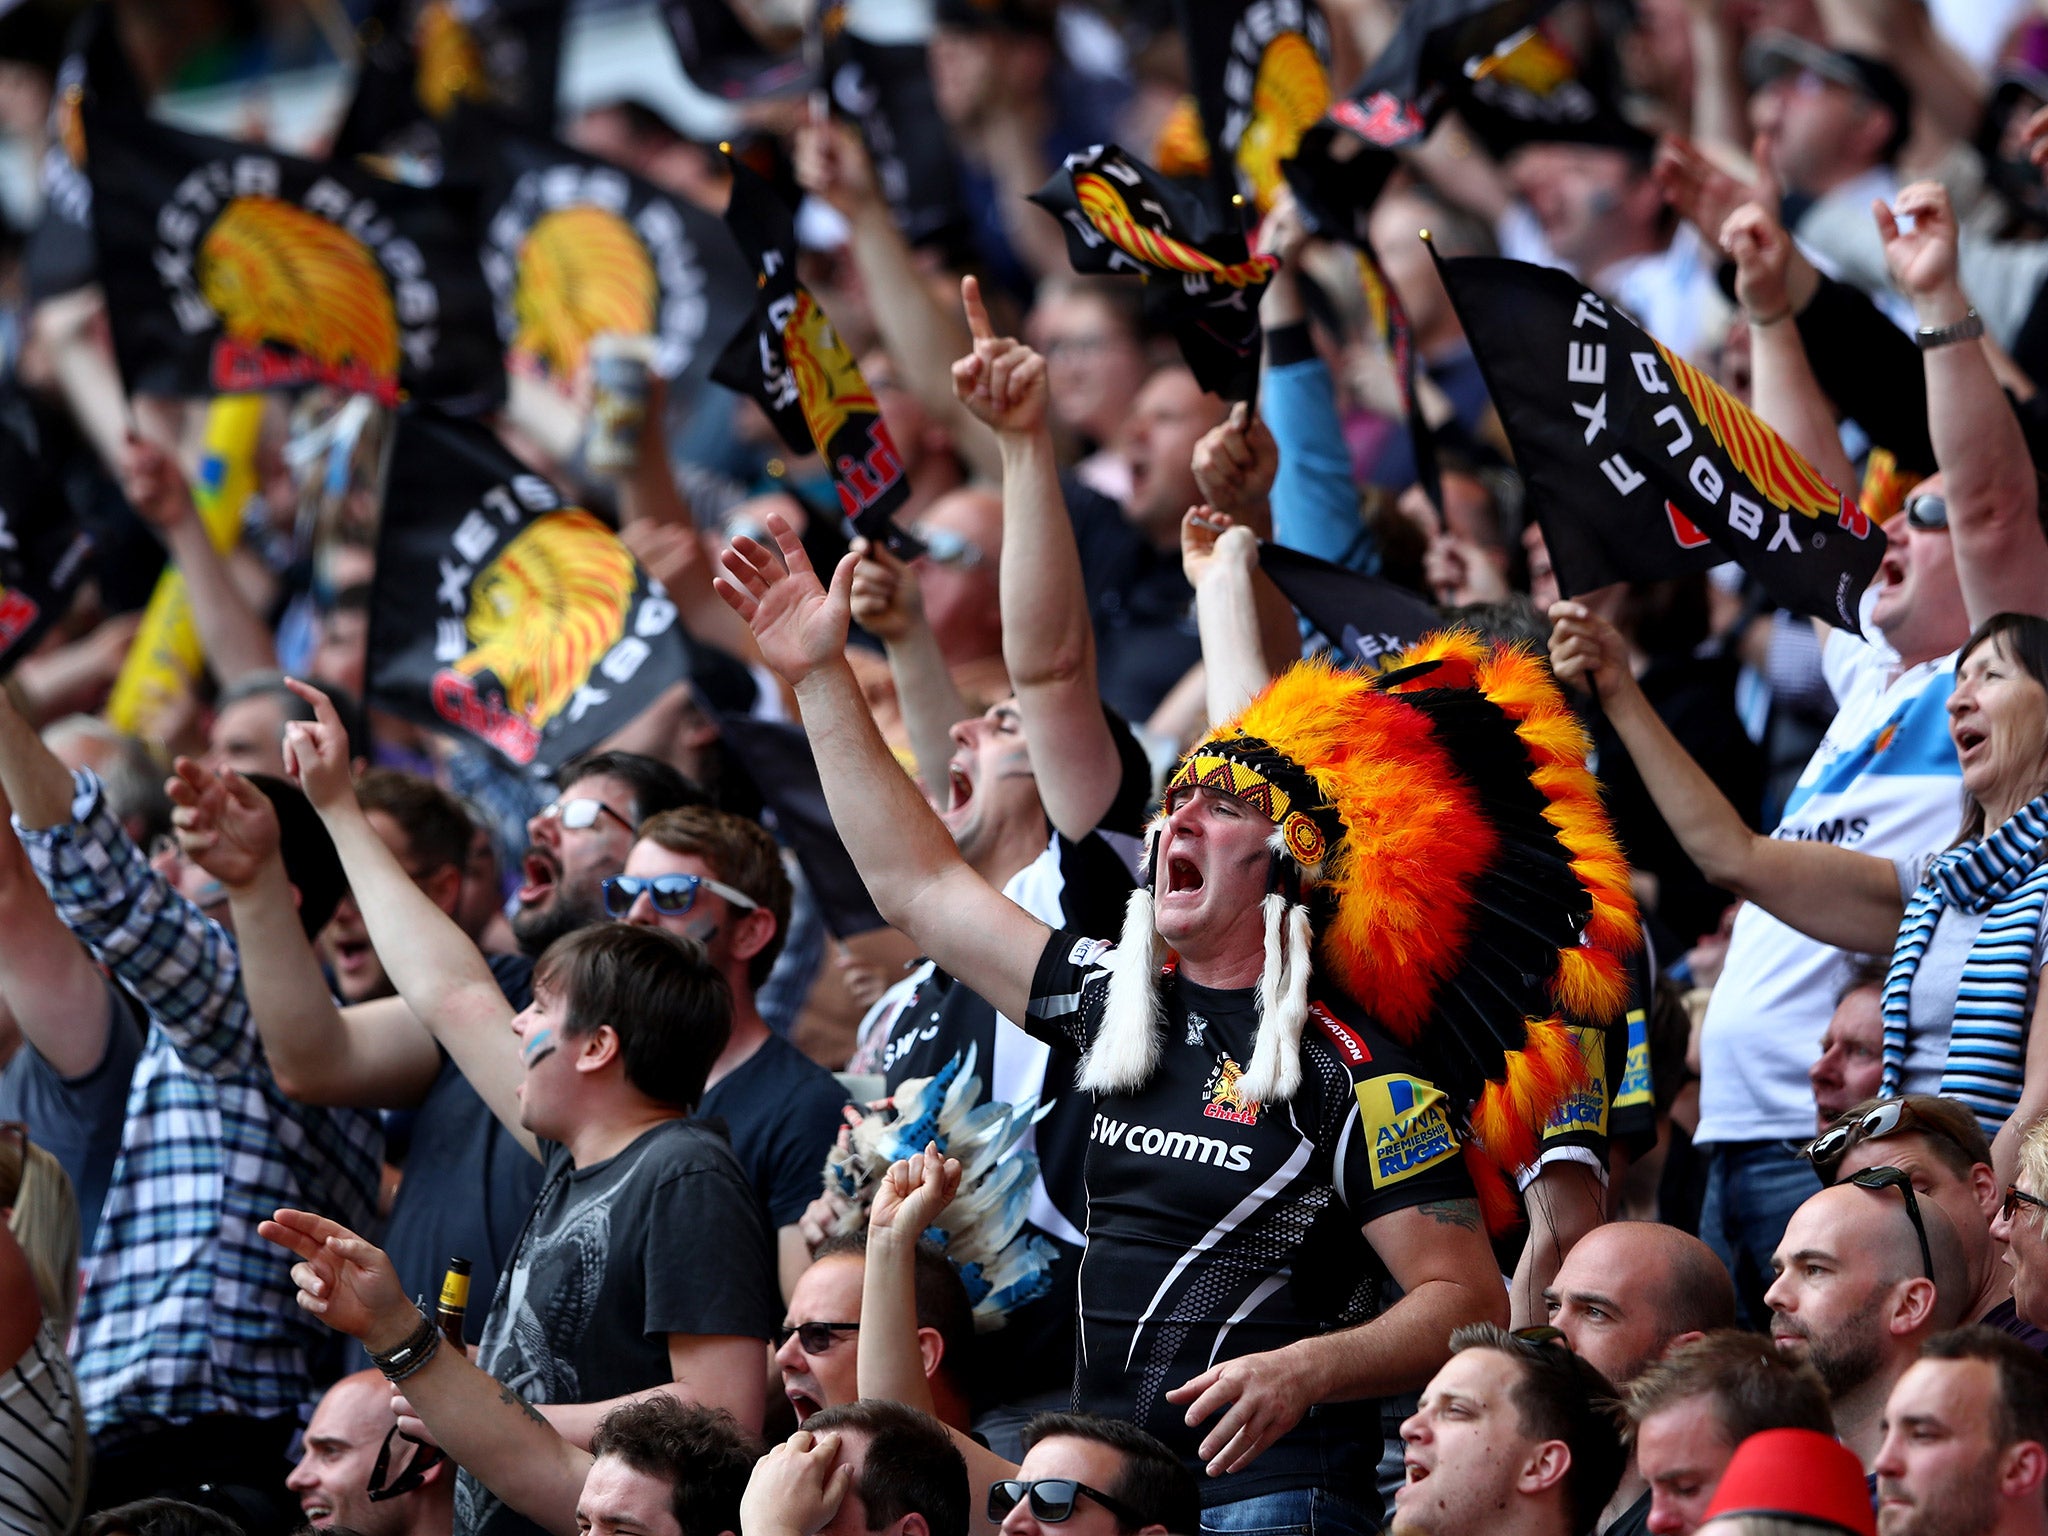 Exeter fans celebrate their side's opening try through Jack Yeandle